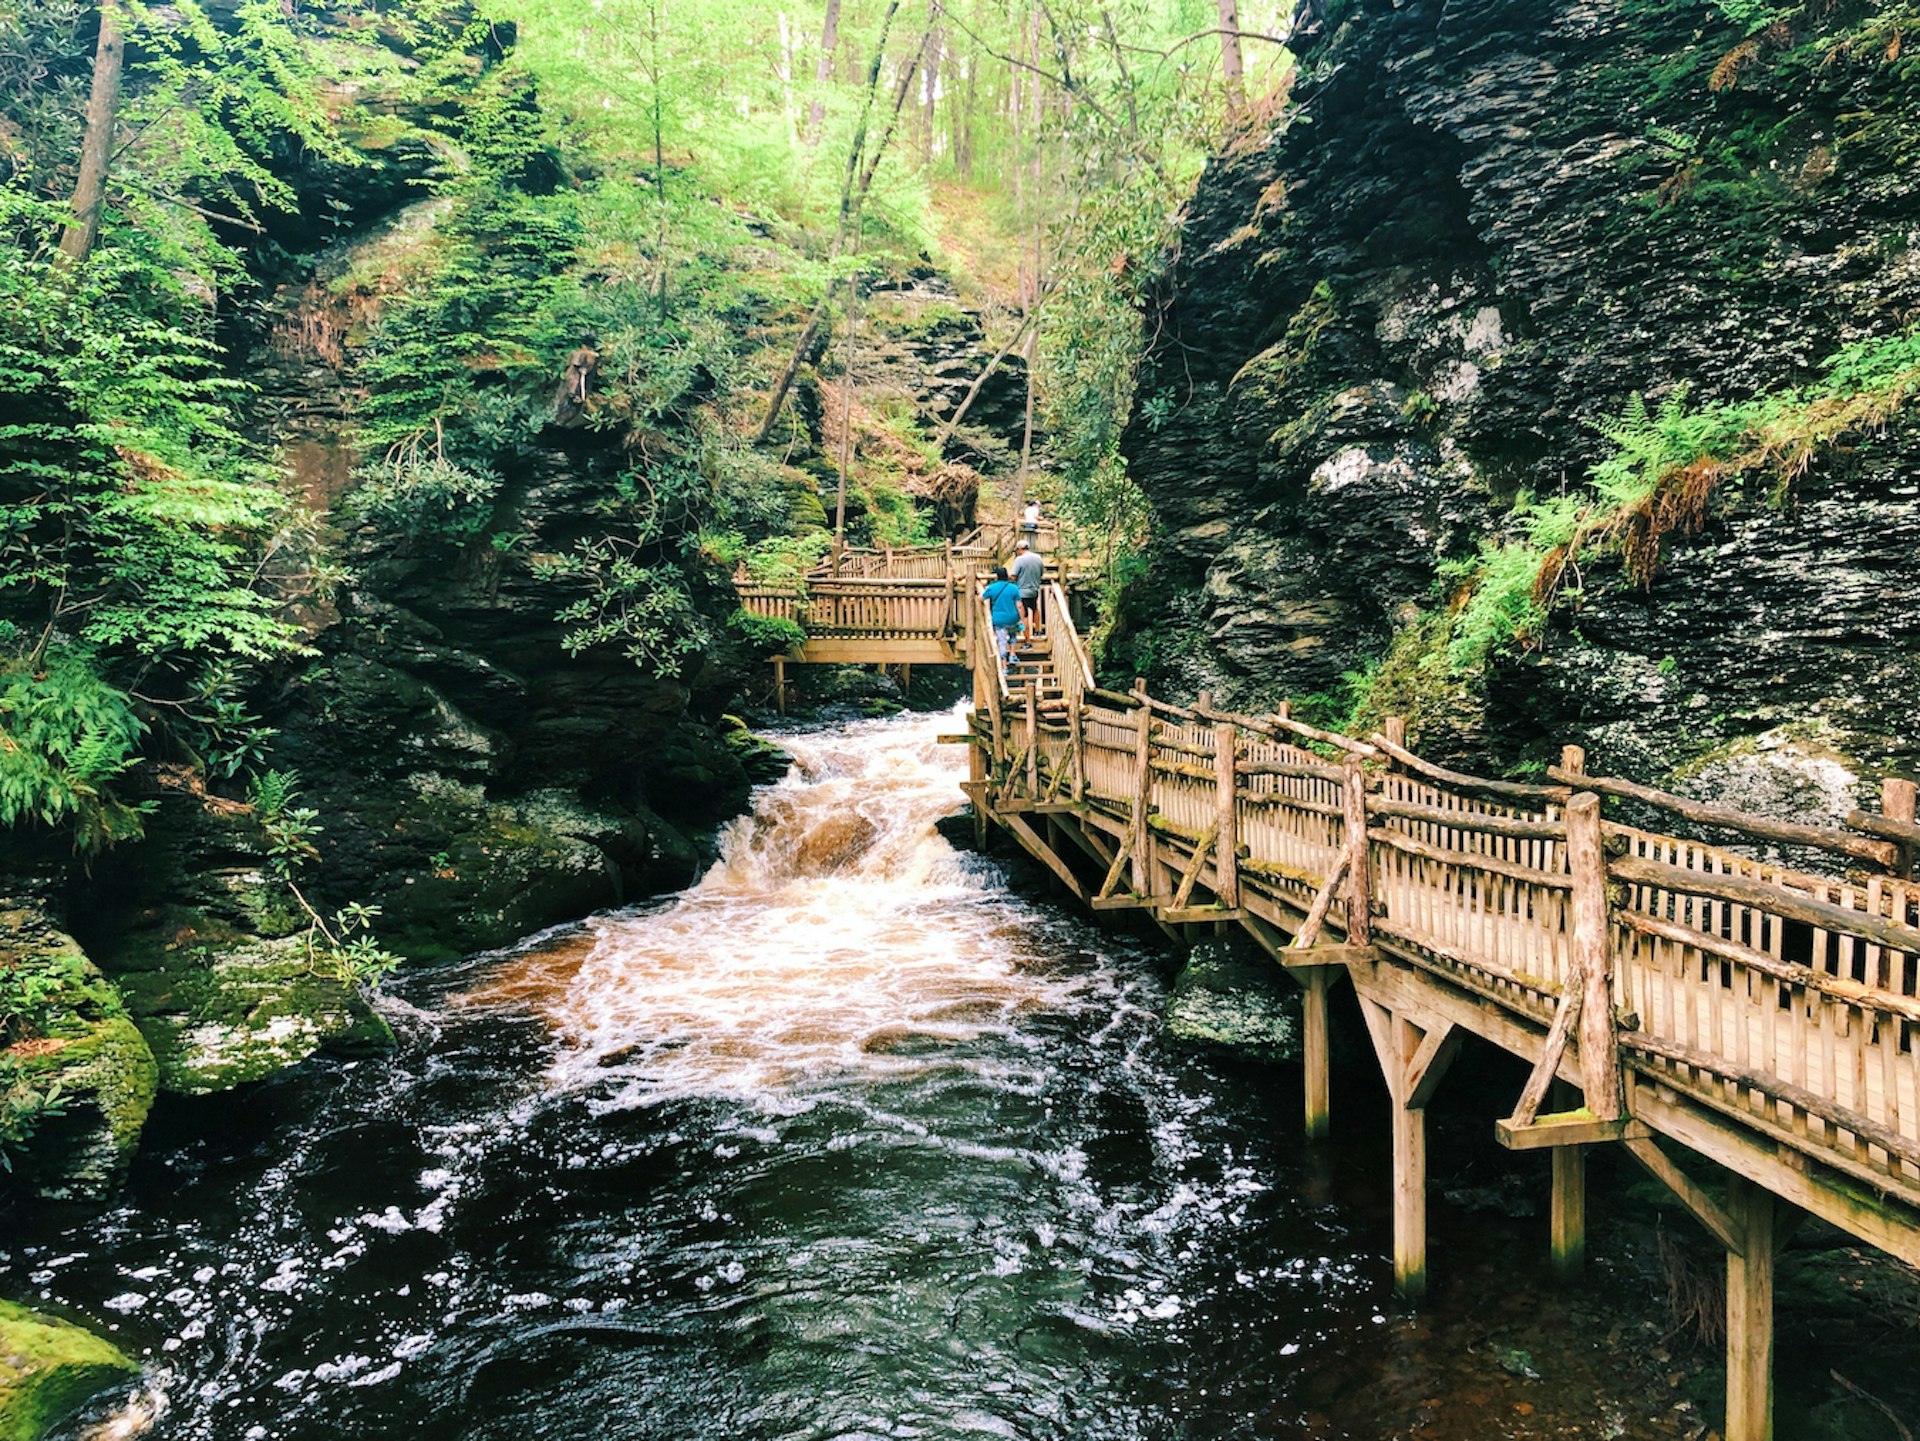 A wooden boardwalk and stairs that lead a path through Bushkill Falls canyon and waterfalls